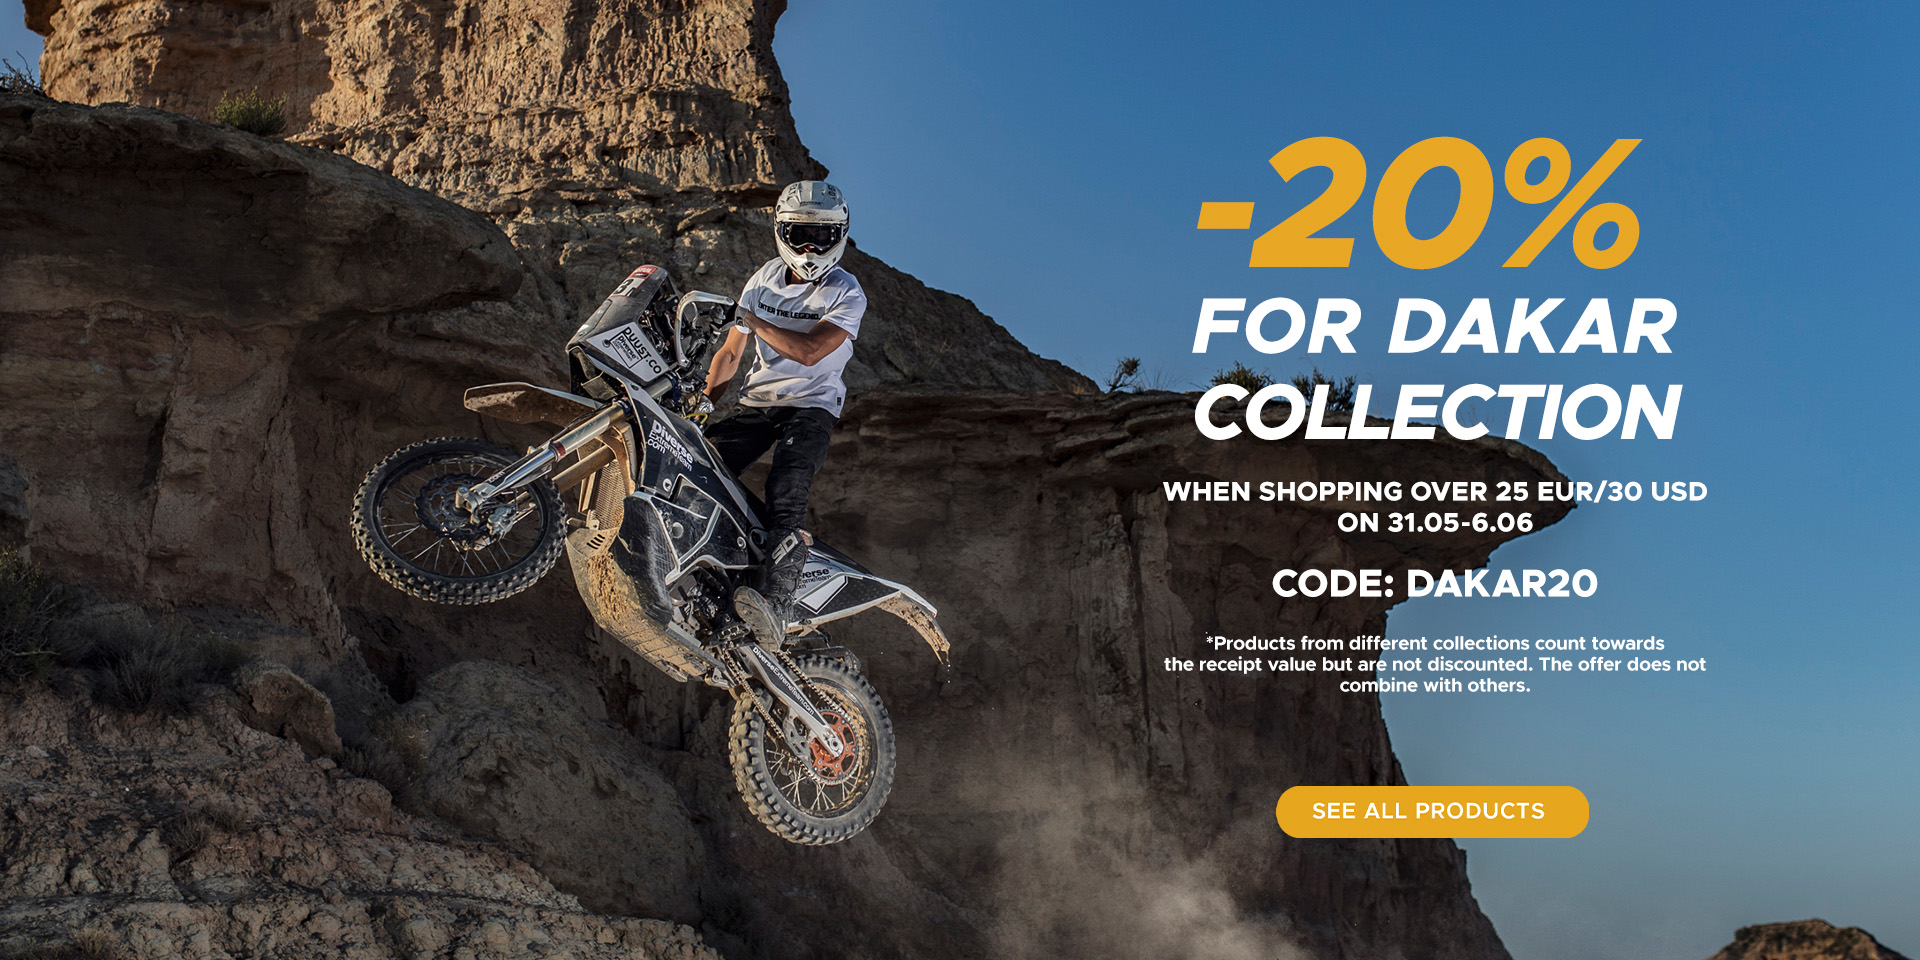 -20% on models from the DAKAR and Dakar childrens collections for purchases over 25 EURO